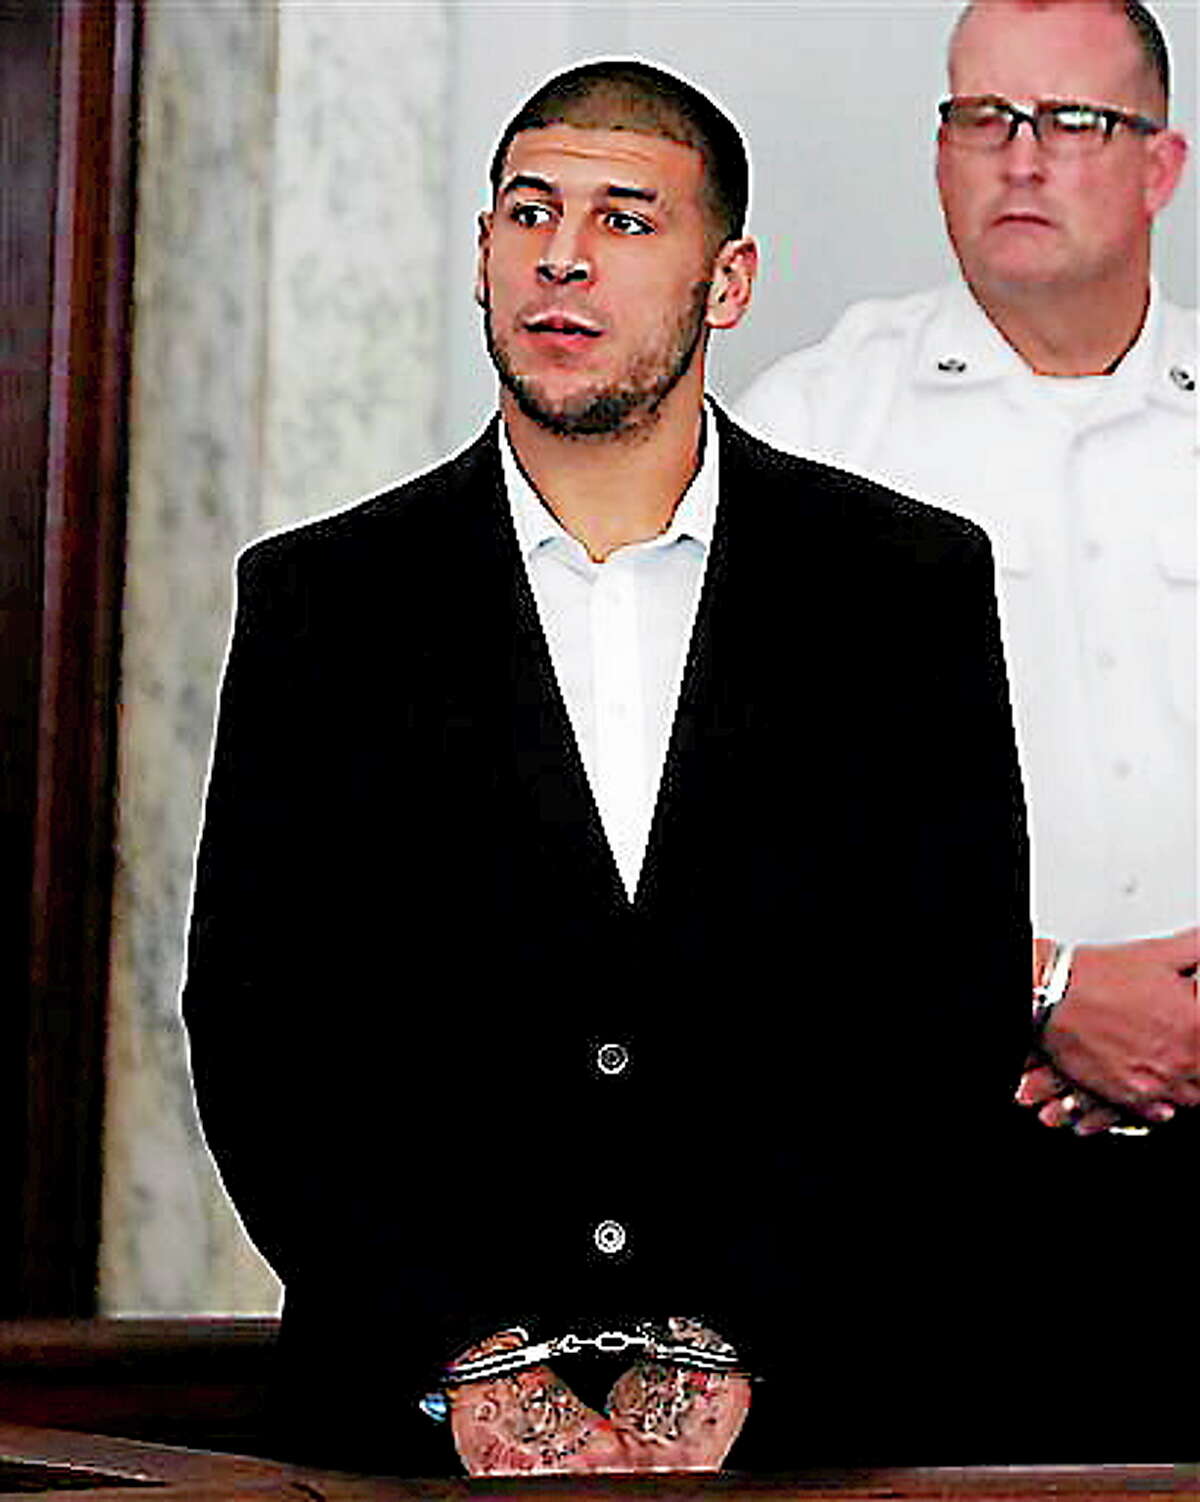 Former New England Patriots NFL football tight end Aaron Hernandez appears at Attleboro District Court on Wednesday, July 24, 2013, in Attleboro, Mass. Hernandez has pleaded not guilty to murder in the death of Odin Lloyd. Hernandez was in court for what was supposed to be a probable cause hearing, but prosecutors said the grand jury is still considering the evidence against him. A judge rescheduled the probable cause hearing for Aug. 22, after considering defense objections to a delay. (AP Photo/Bizuayehu Tesfaye)